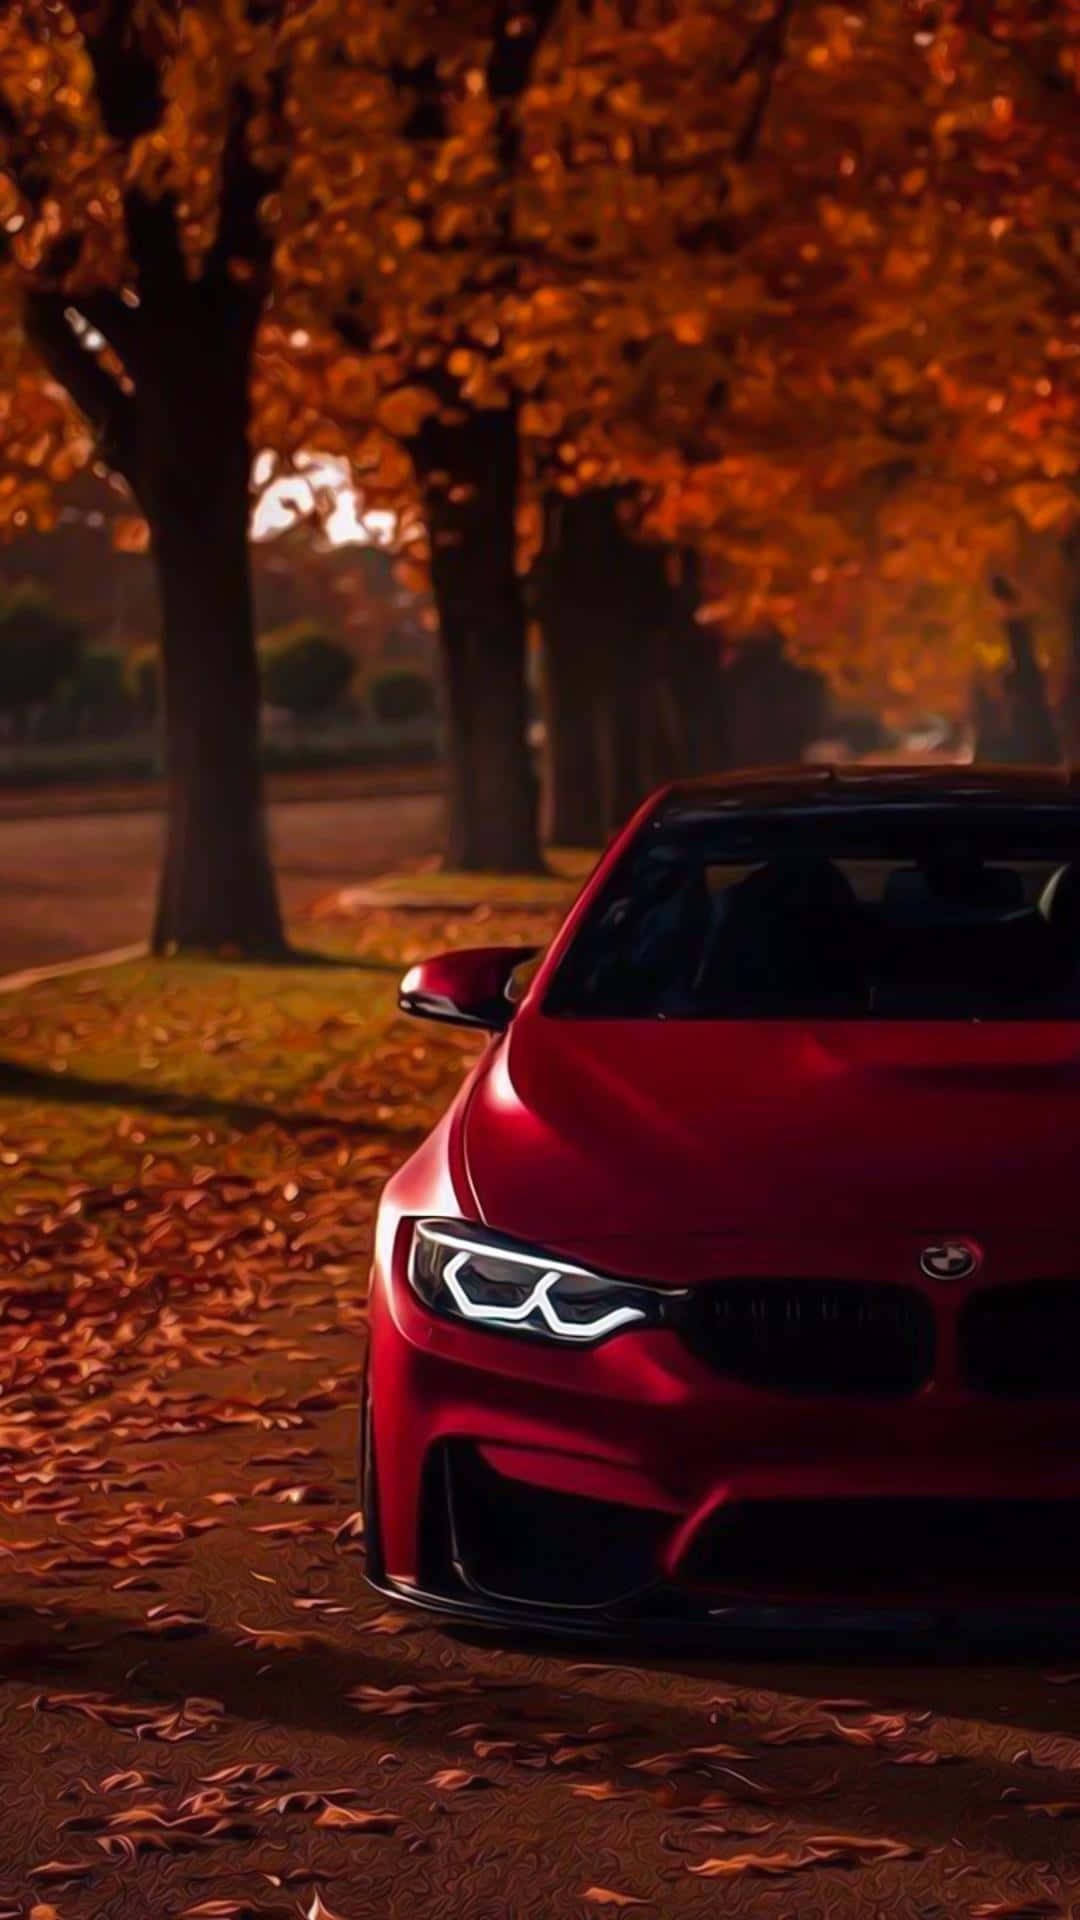 Red Bmw Expensive Parked Wallpaper